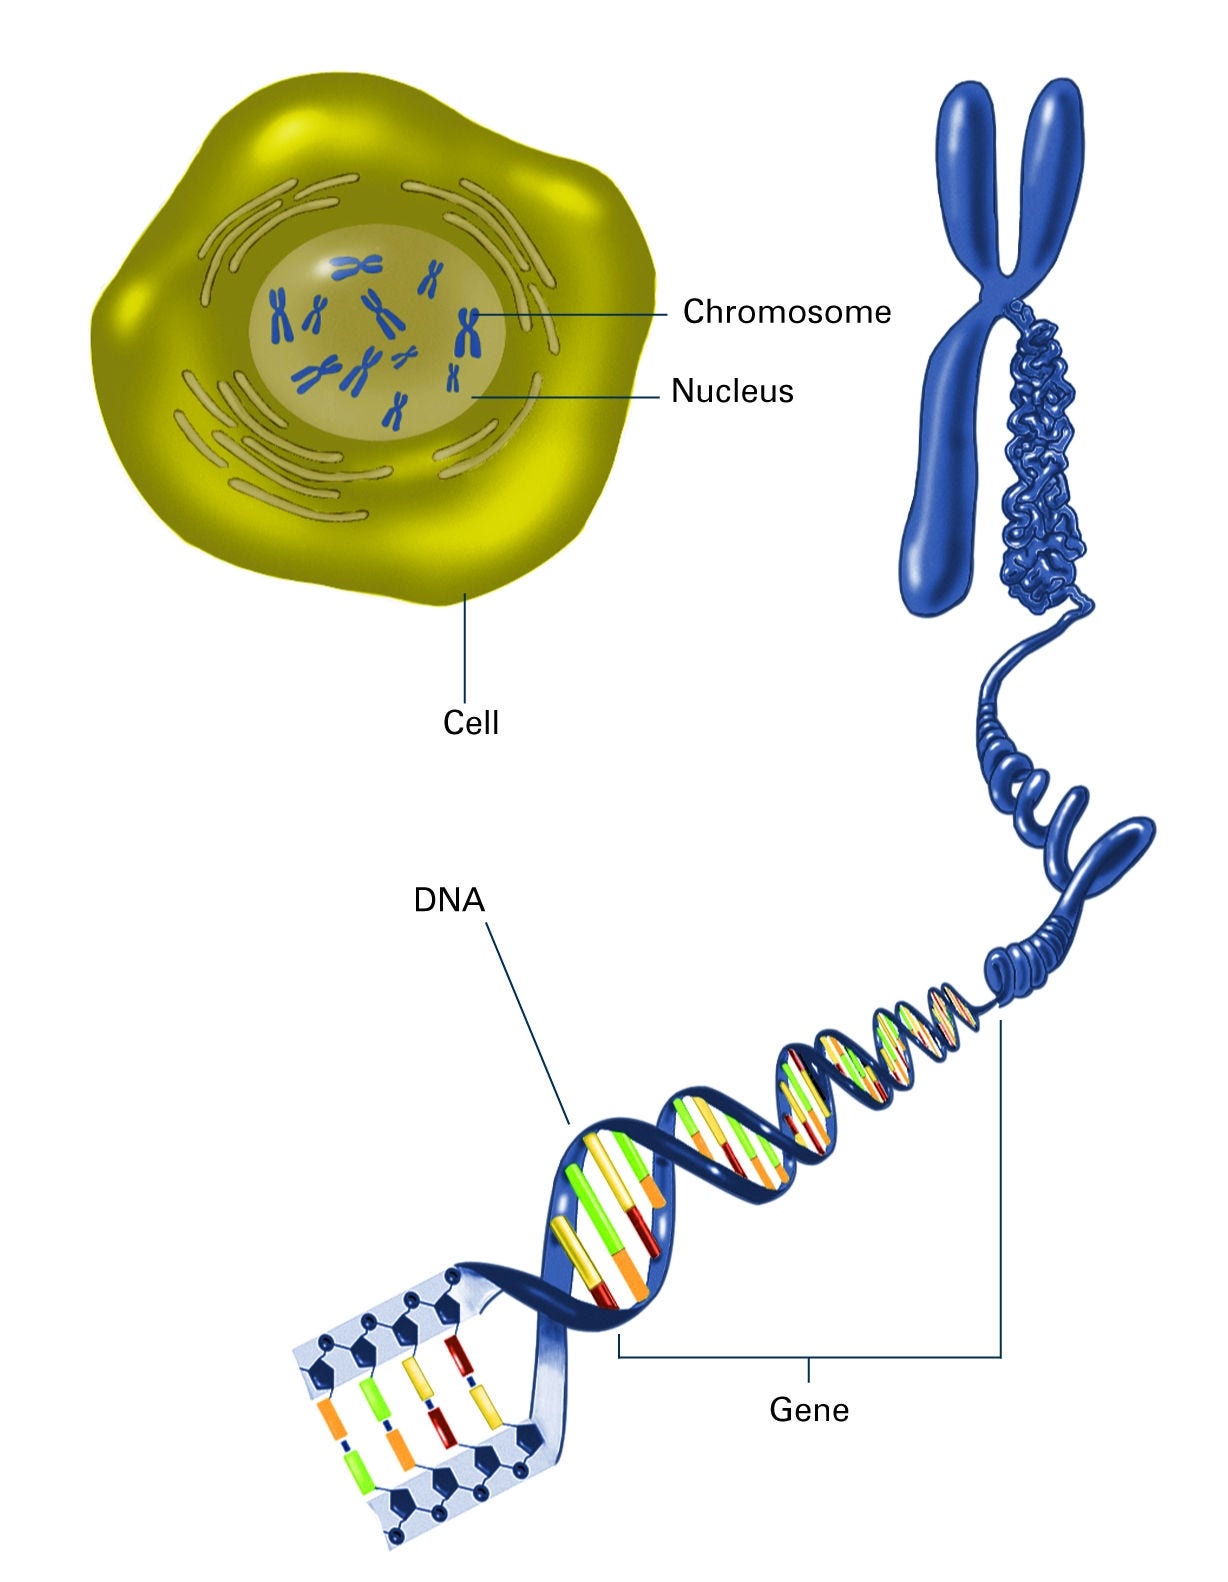 Cell with chromosomes in nucleus and enlarged chromosome showing piece stretched out to show coiled DNA and gene section